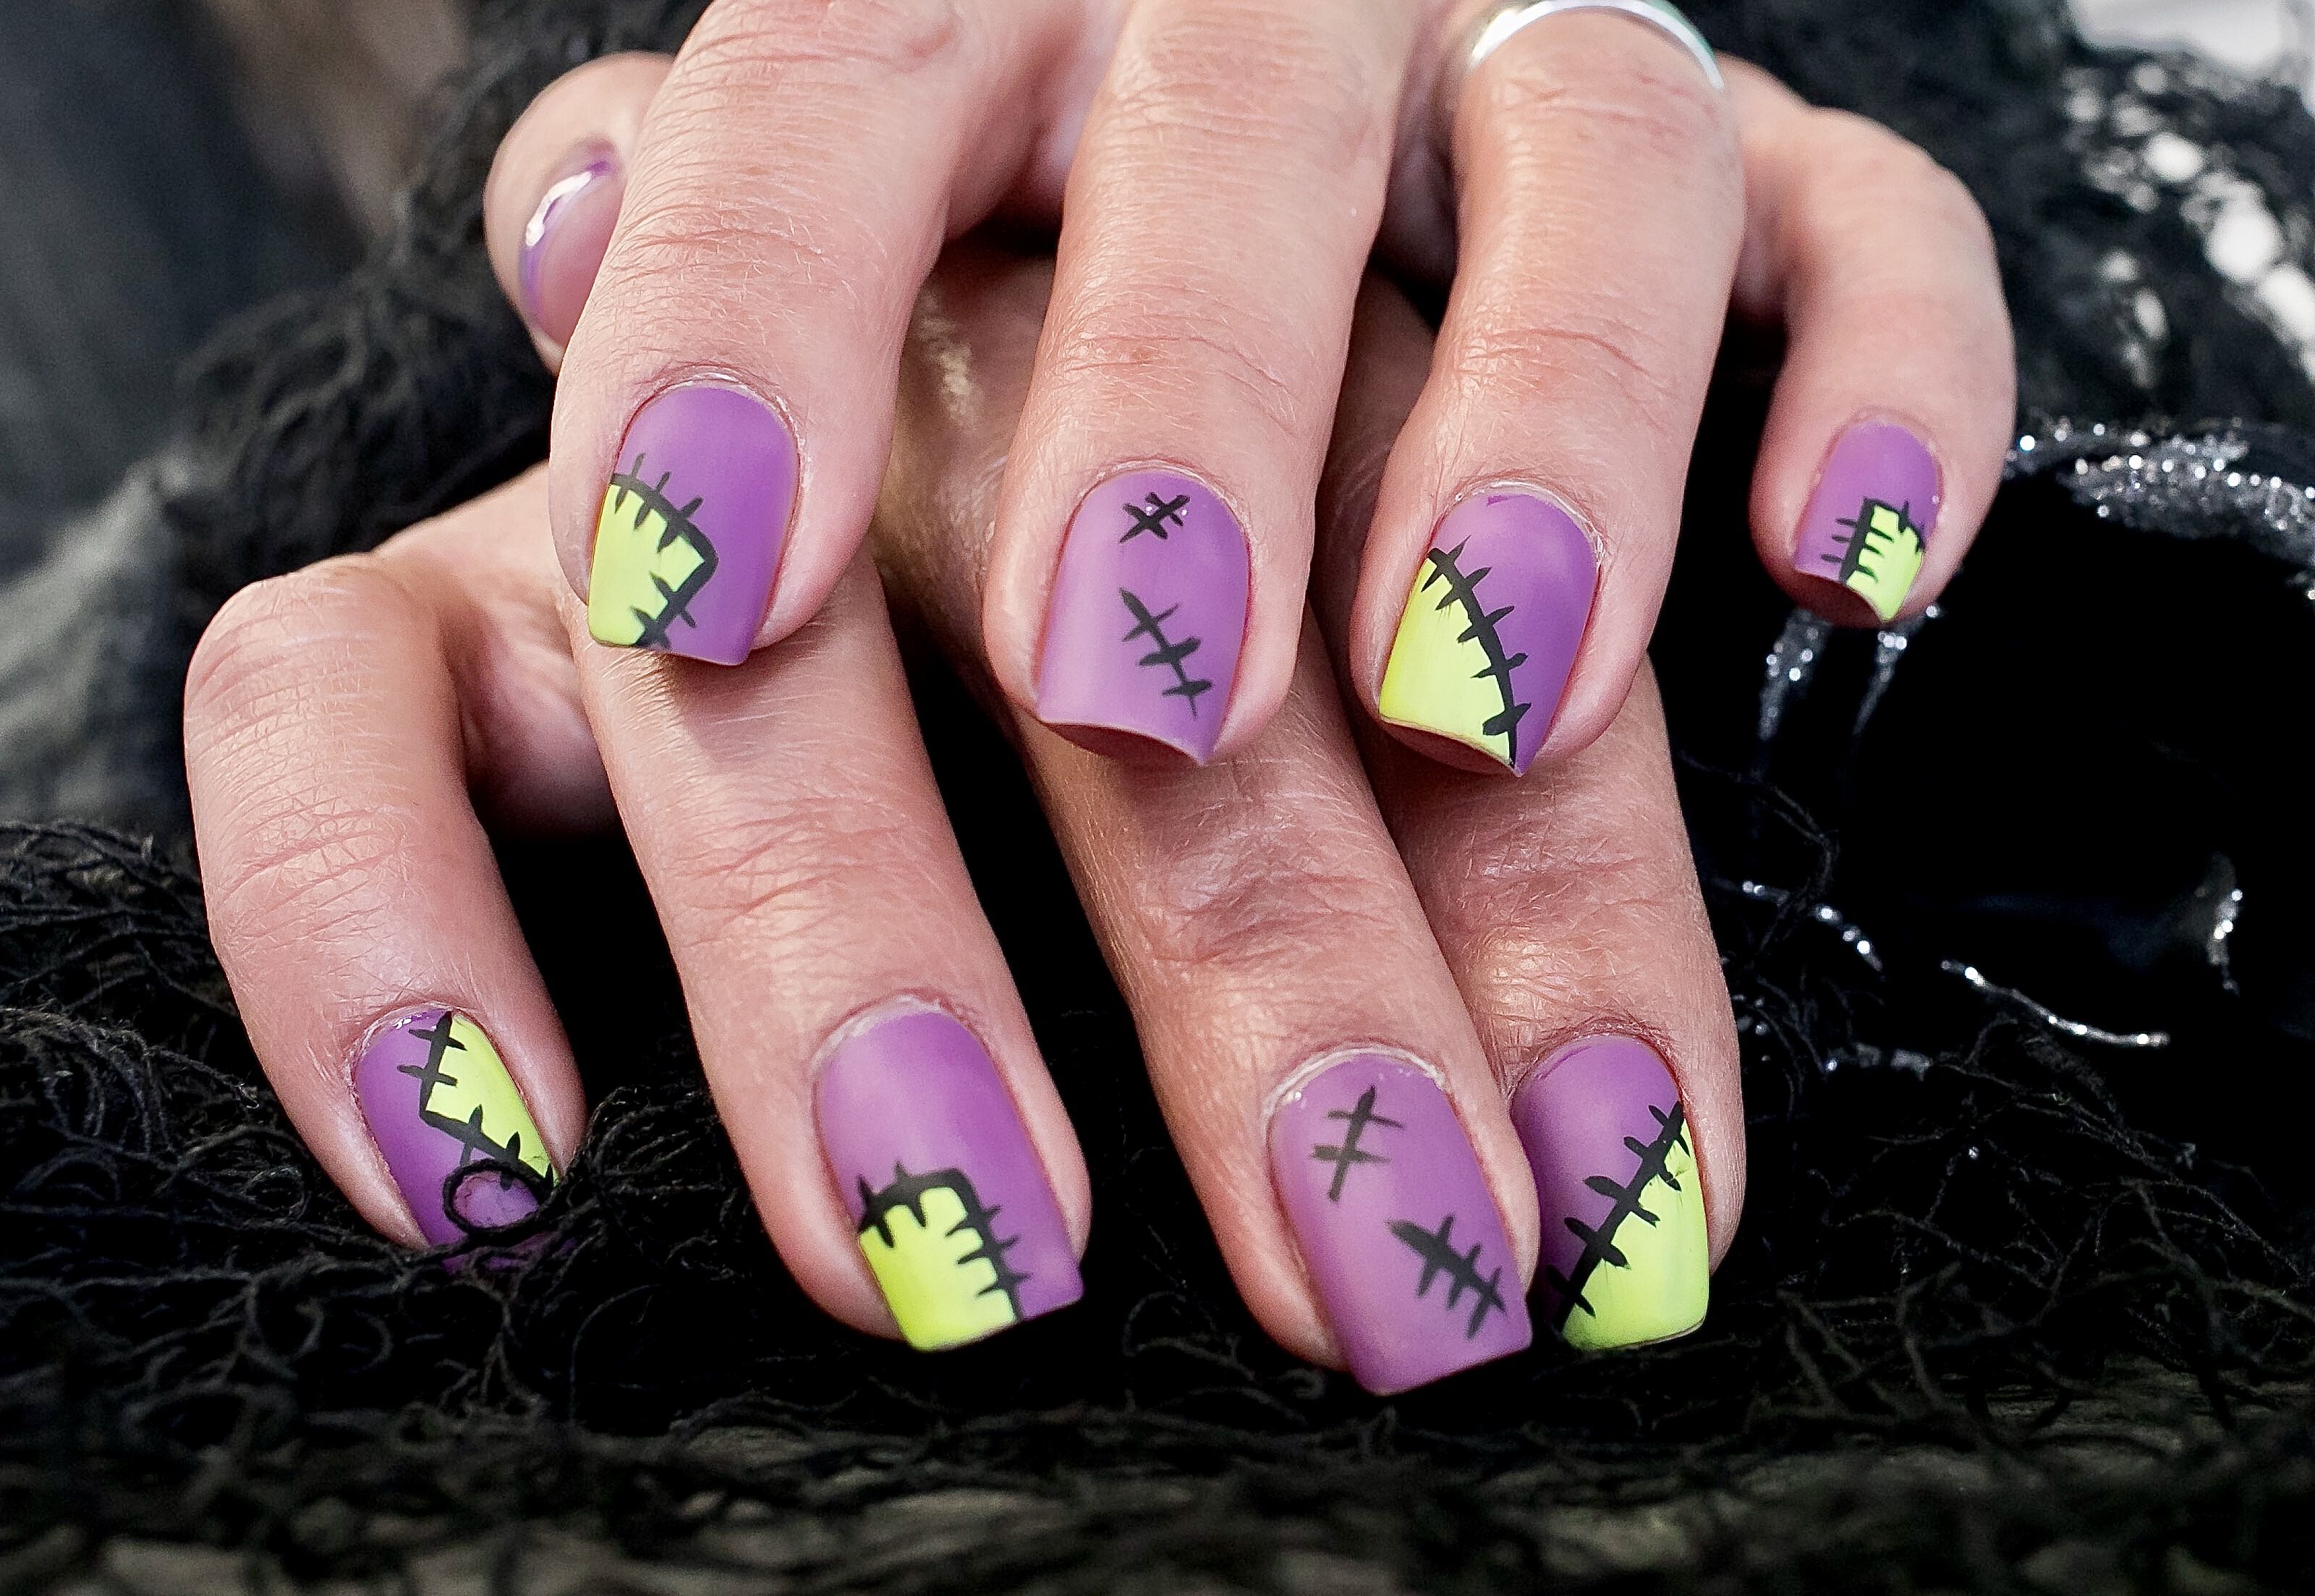 Mooncat Launches 'The Nightmare Before Christmas' Nail Art Collection